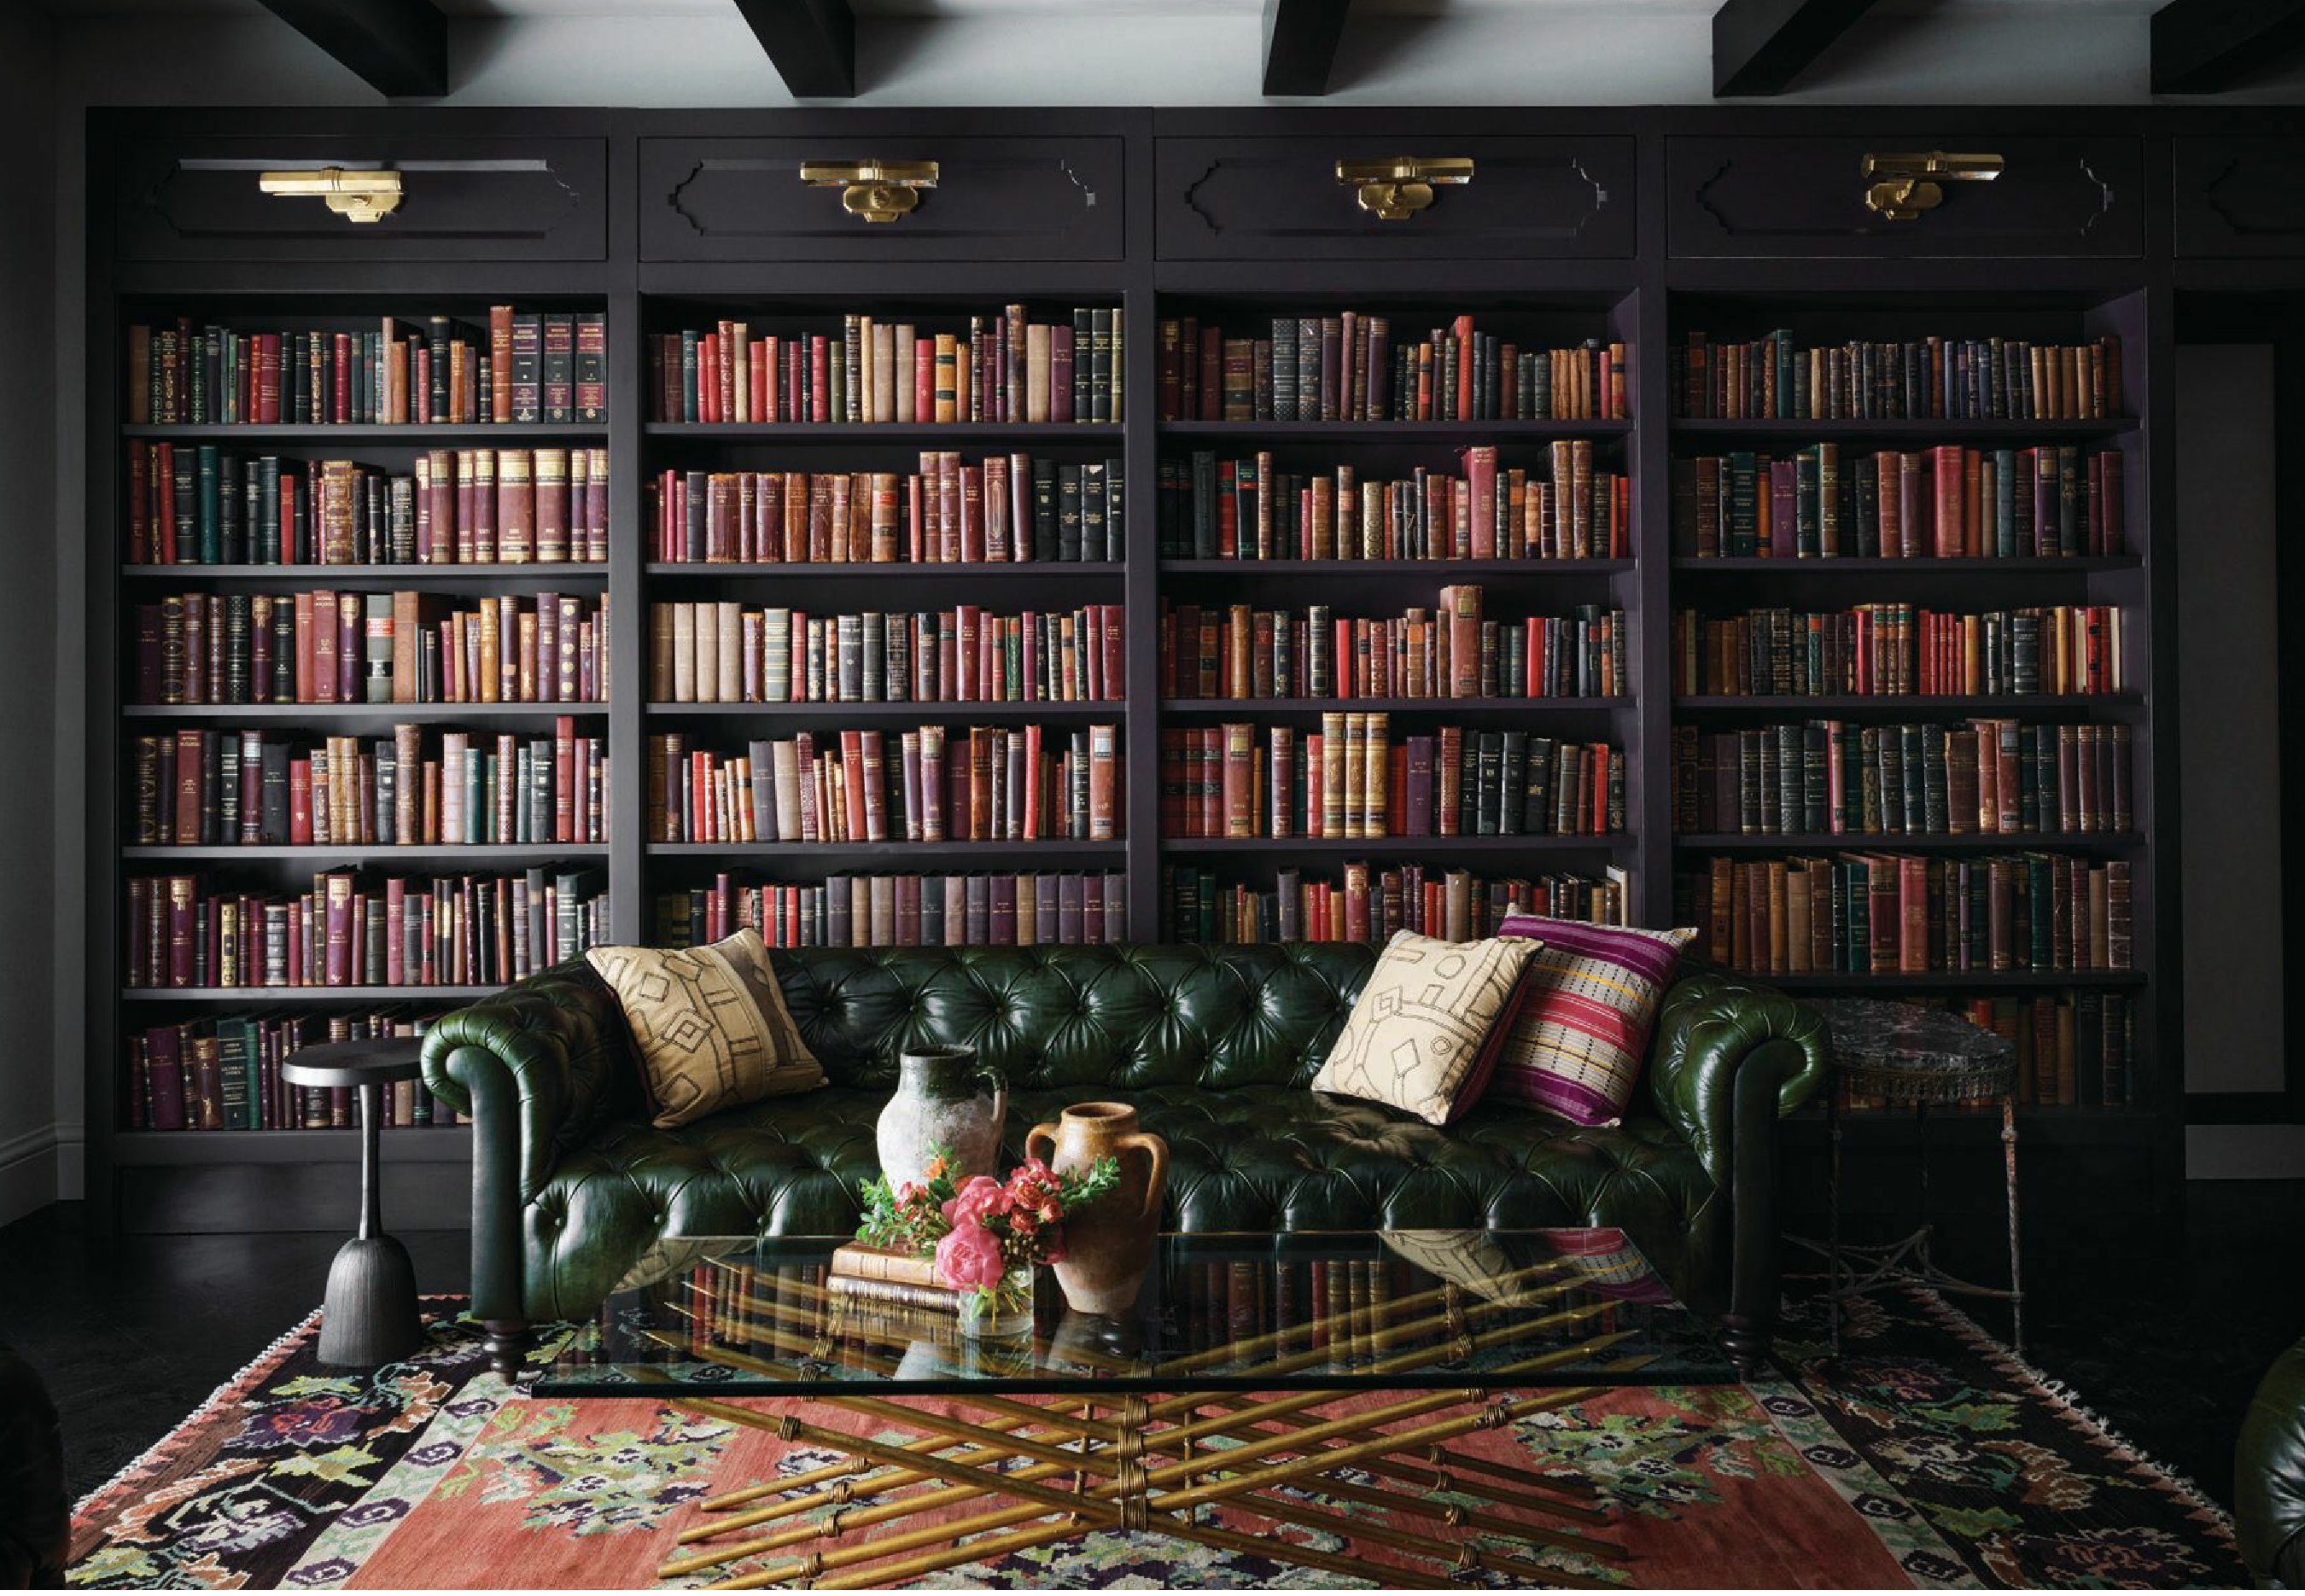 Each room in the original Mansion and the newly built three-story Inn provides guests with the perfect ambiance, whether they’re seeking a full day in the library cozied up with a good read or an afternoon indulging in a spalike experience. PHOTO BY DOUGLAS FRIEDMAN